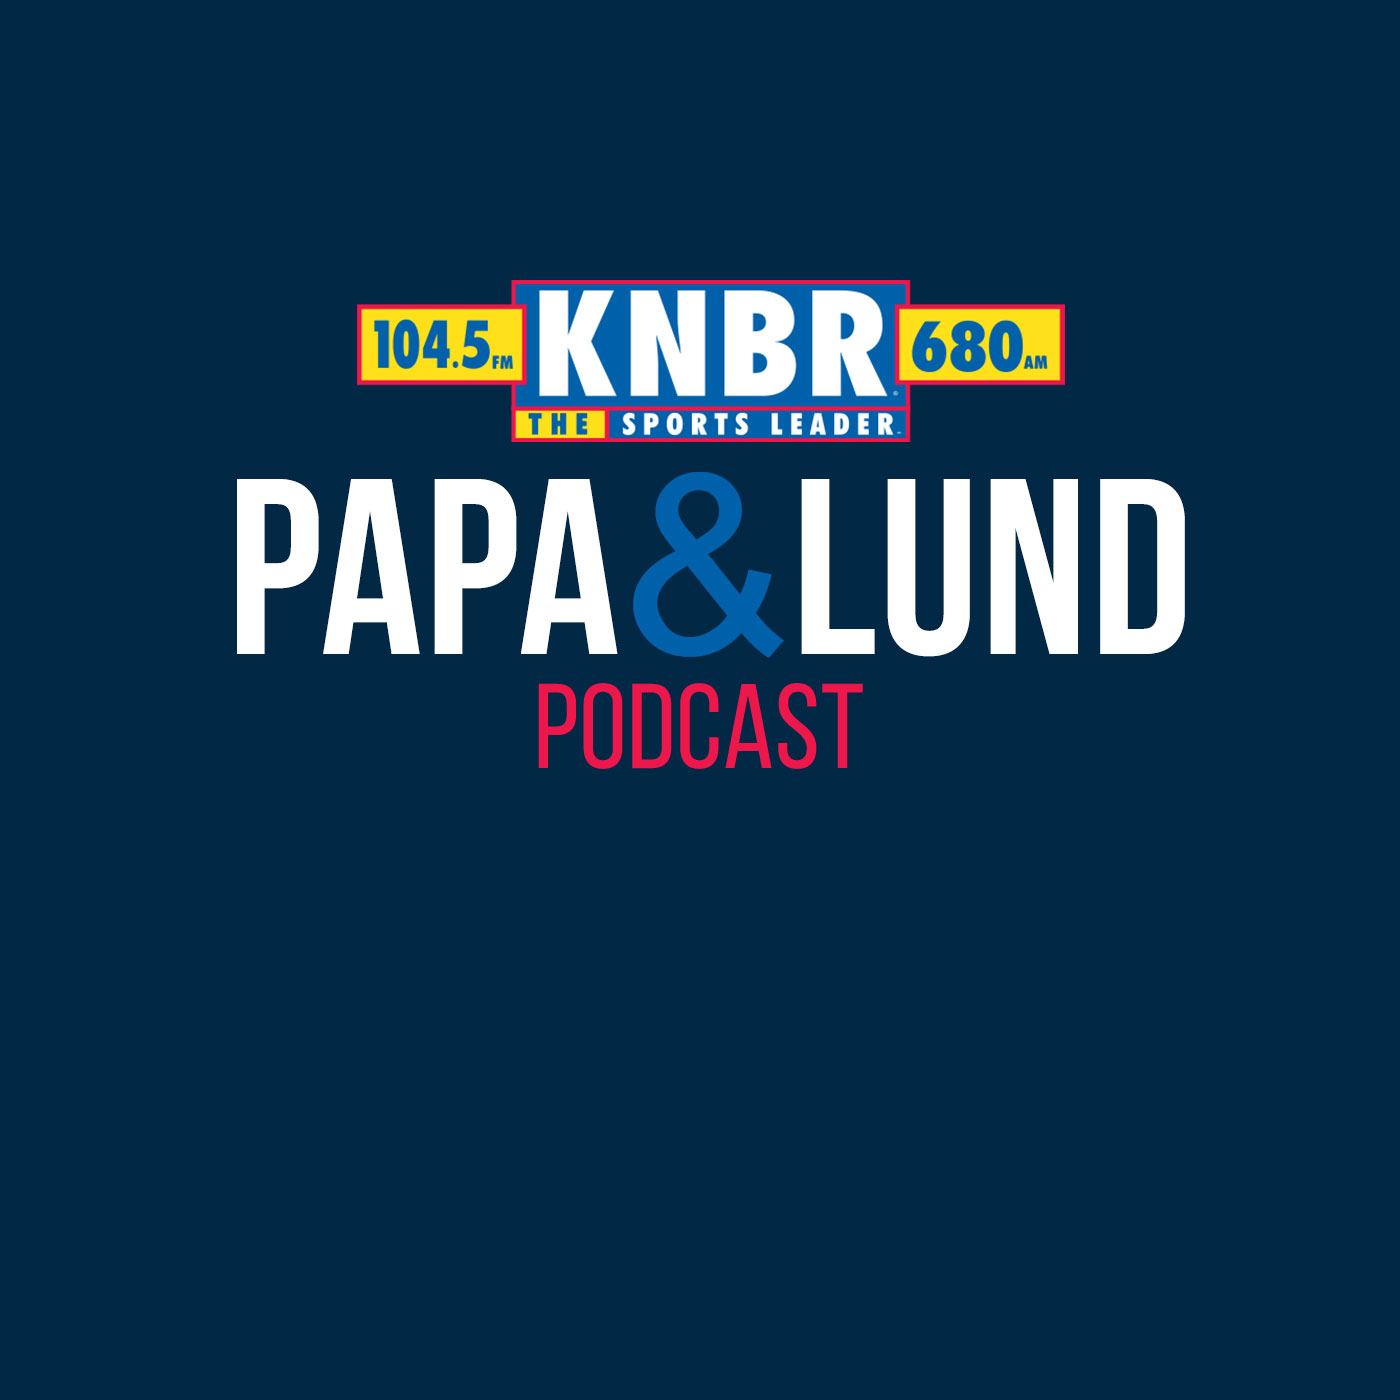 5-14 Papa & Lund Show - Hour 2 - Papa & Lund discuss potential chance to the lineup that could help the Giants, discuss the 49ers opening Week 1 on Monday Night Football + Interview with David Lombardi